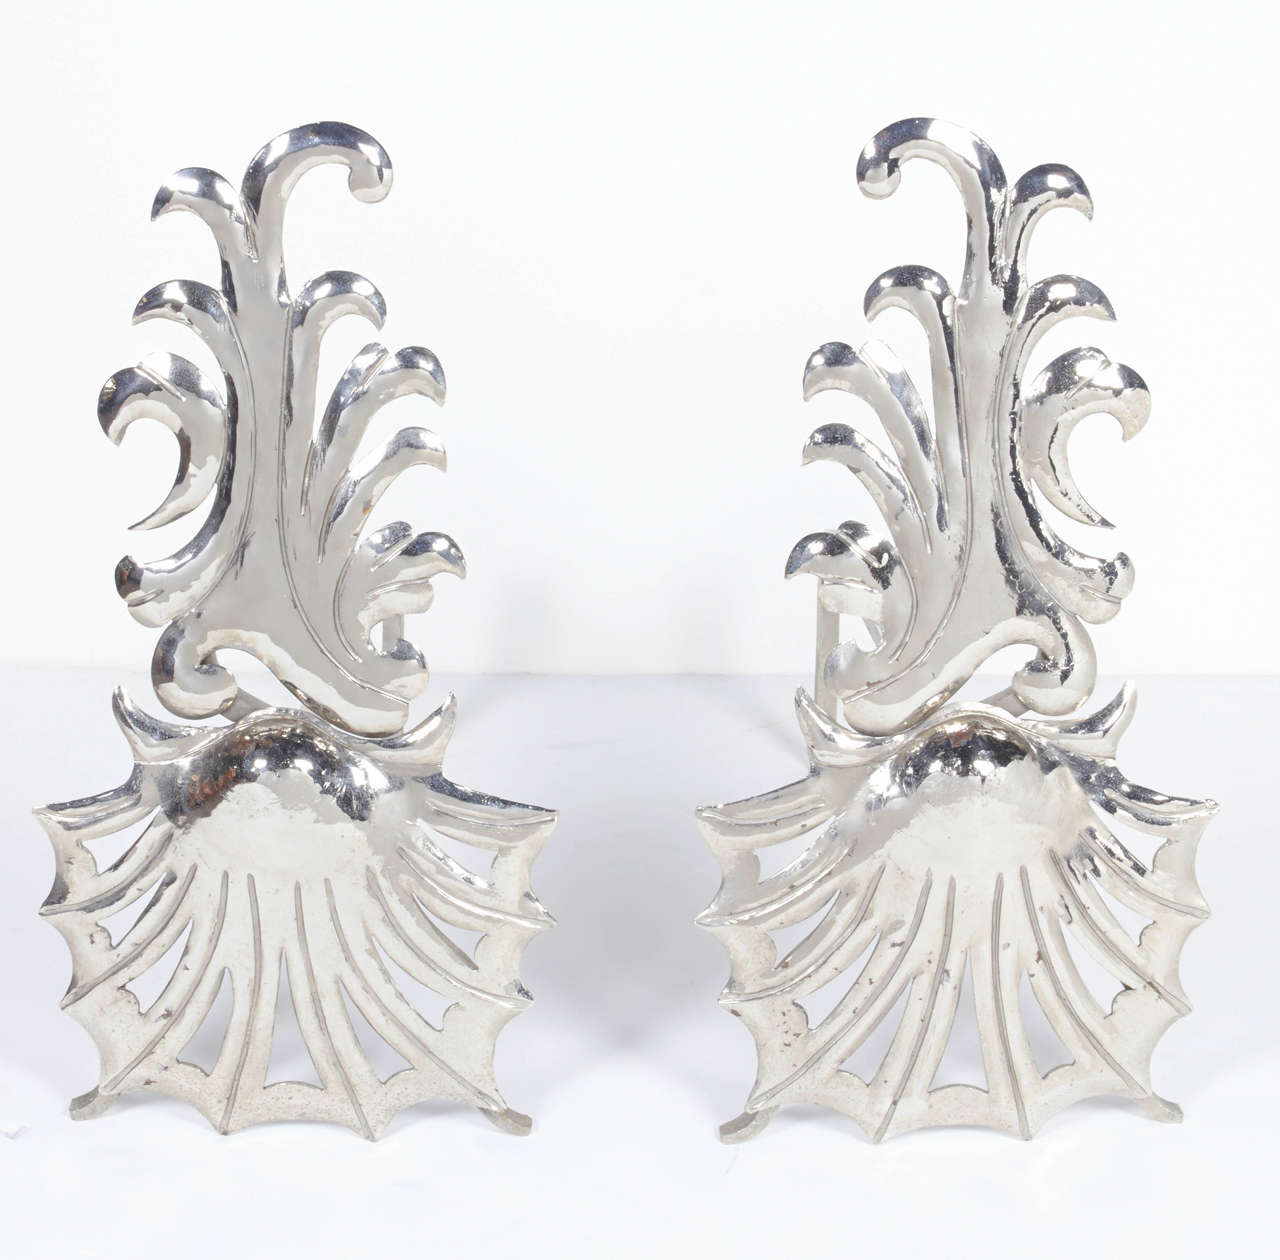 Pair of elegant fireplace andirons with stylized shell design and wave patterns. Polished nickeled finish over steel and cast iron. Featuring hand-forged and hand pierced eclectic Hollywood Regency design.